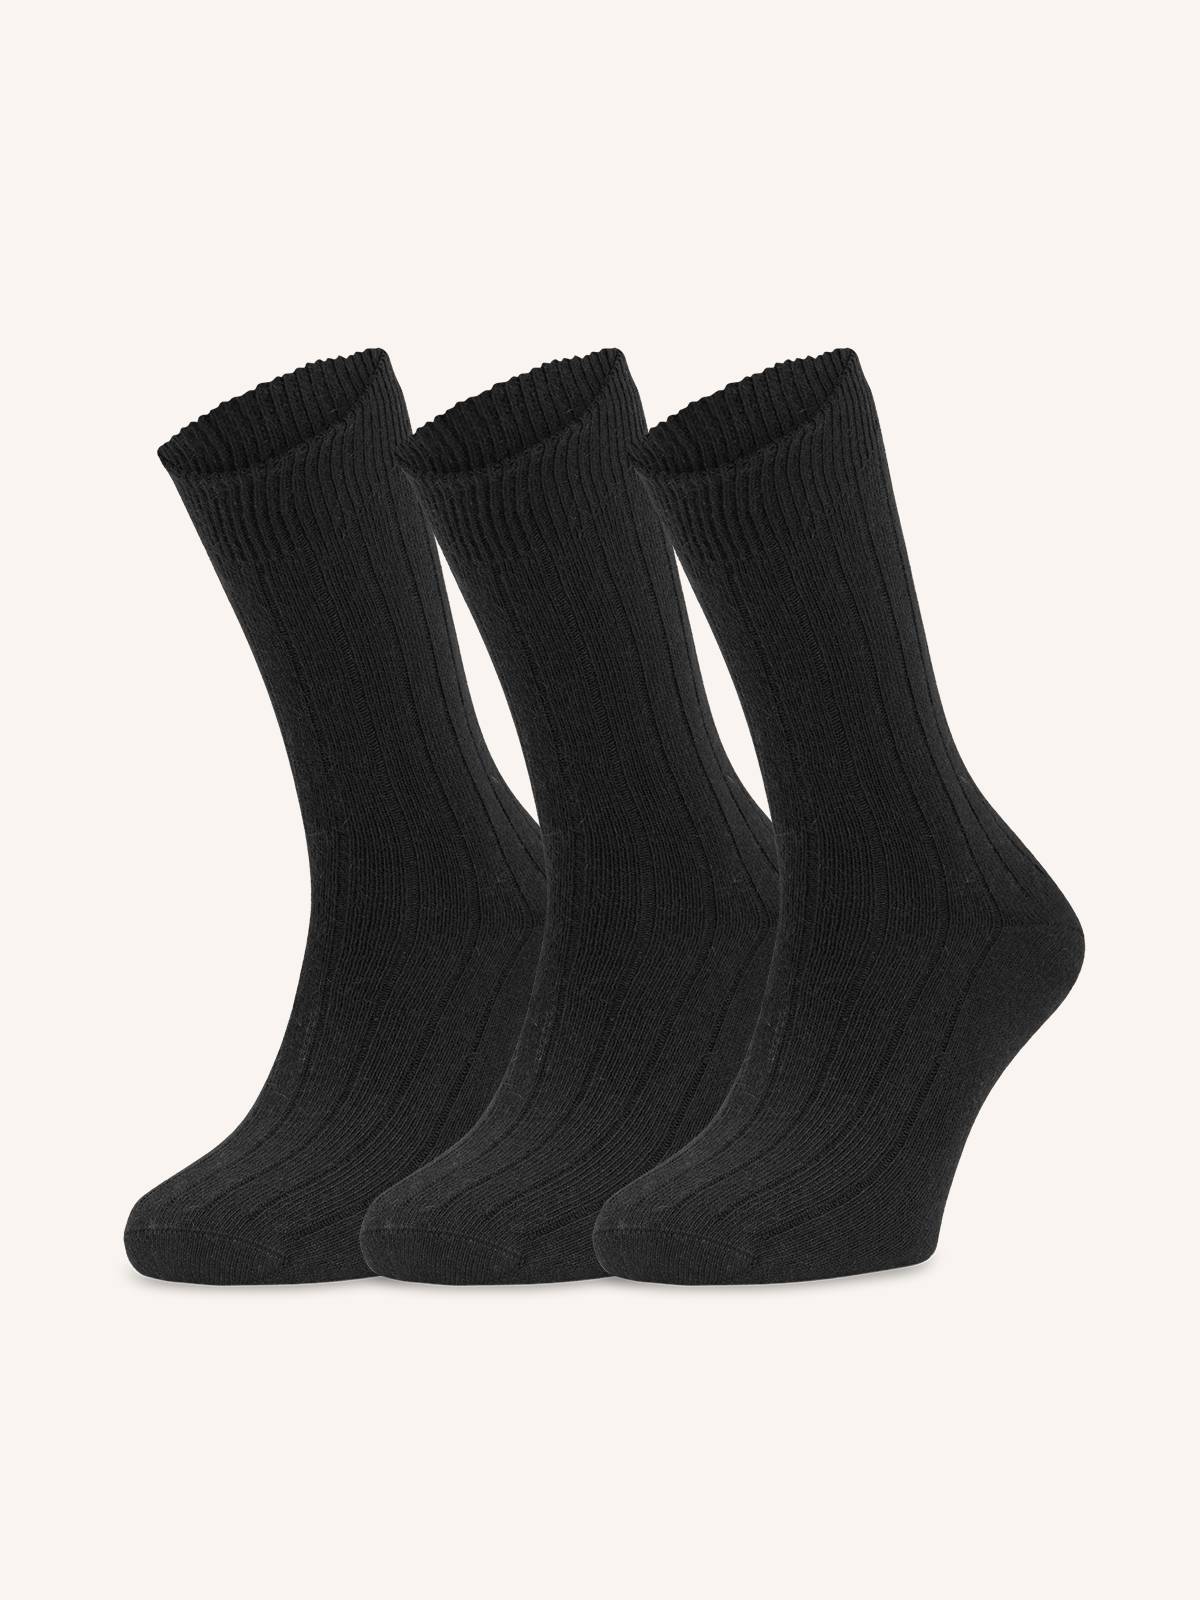 Short Socks in Angora, Cotton and Viscose for Men | Plain Color | Pack of 3 Pairs | Blond C